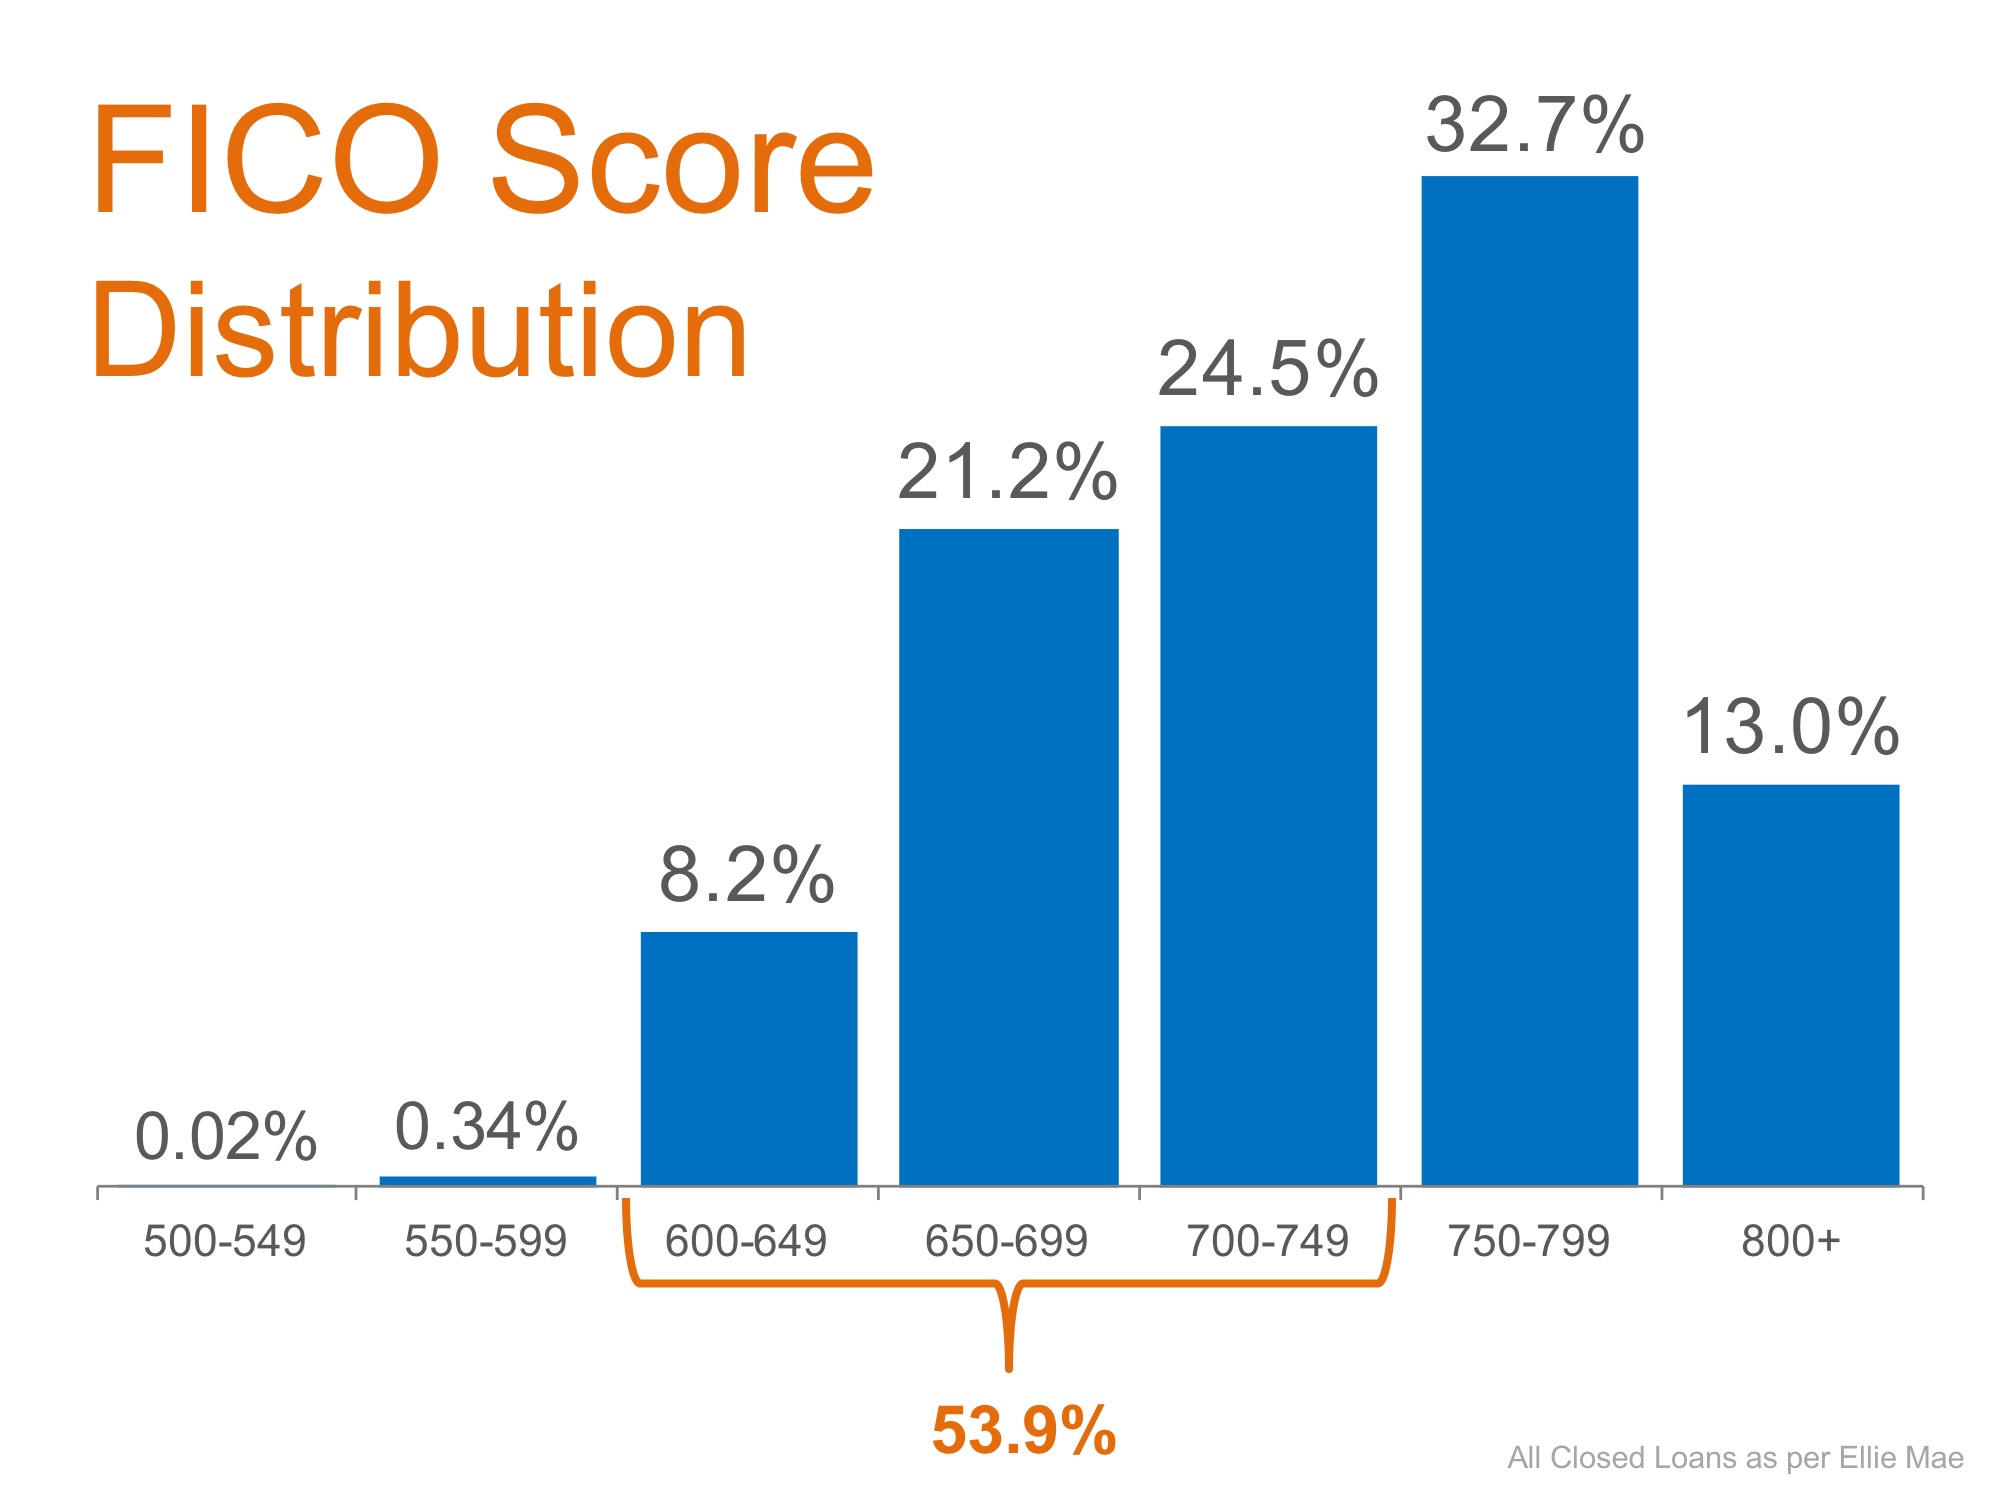 Don’t Disqualify Yourself… Over Half of All Loans Approved Have a FICO Score Under 750 | MyKCM